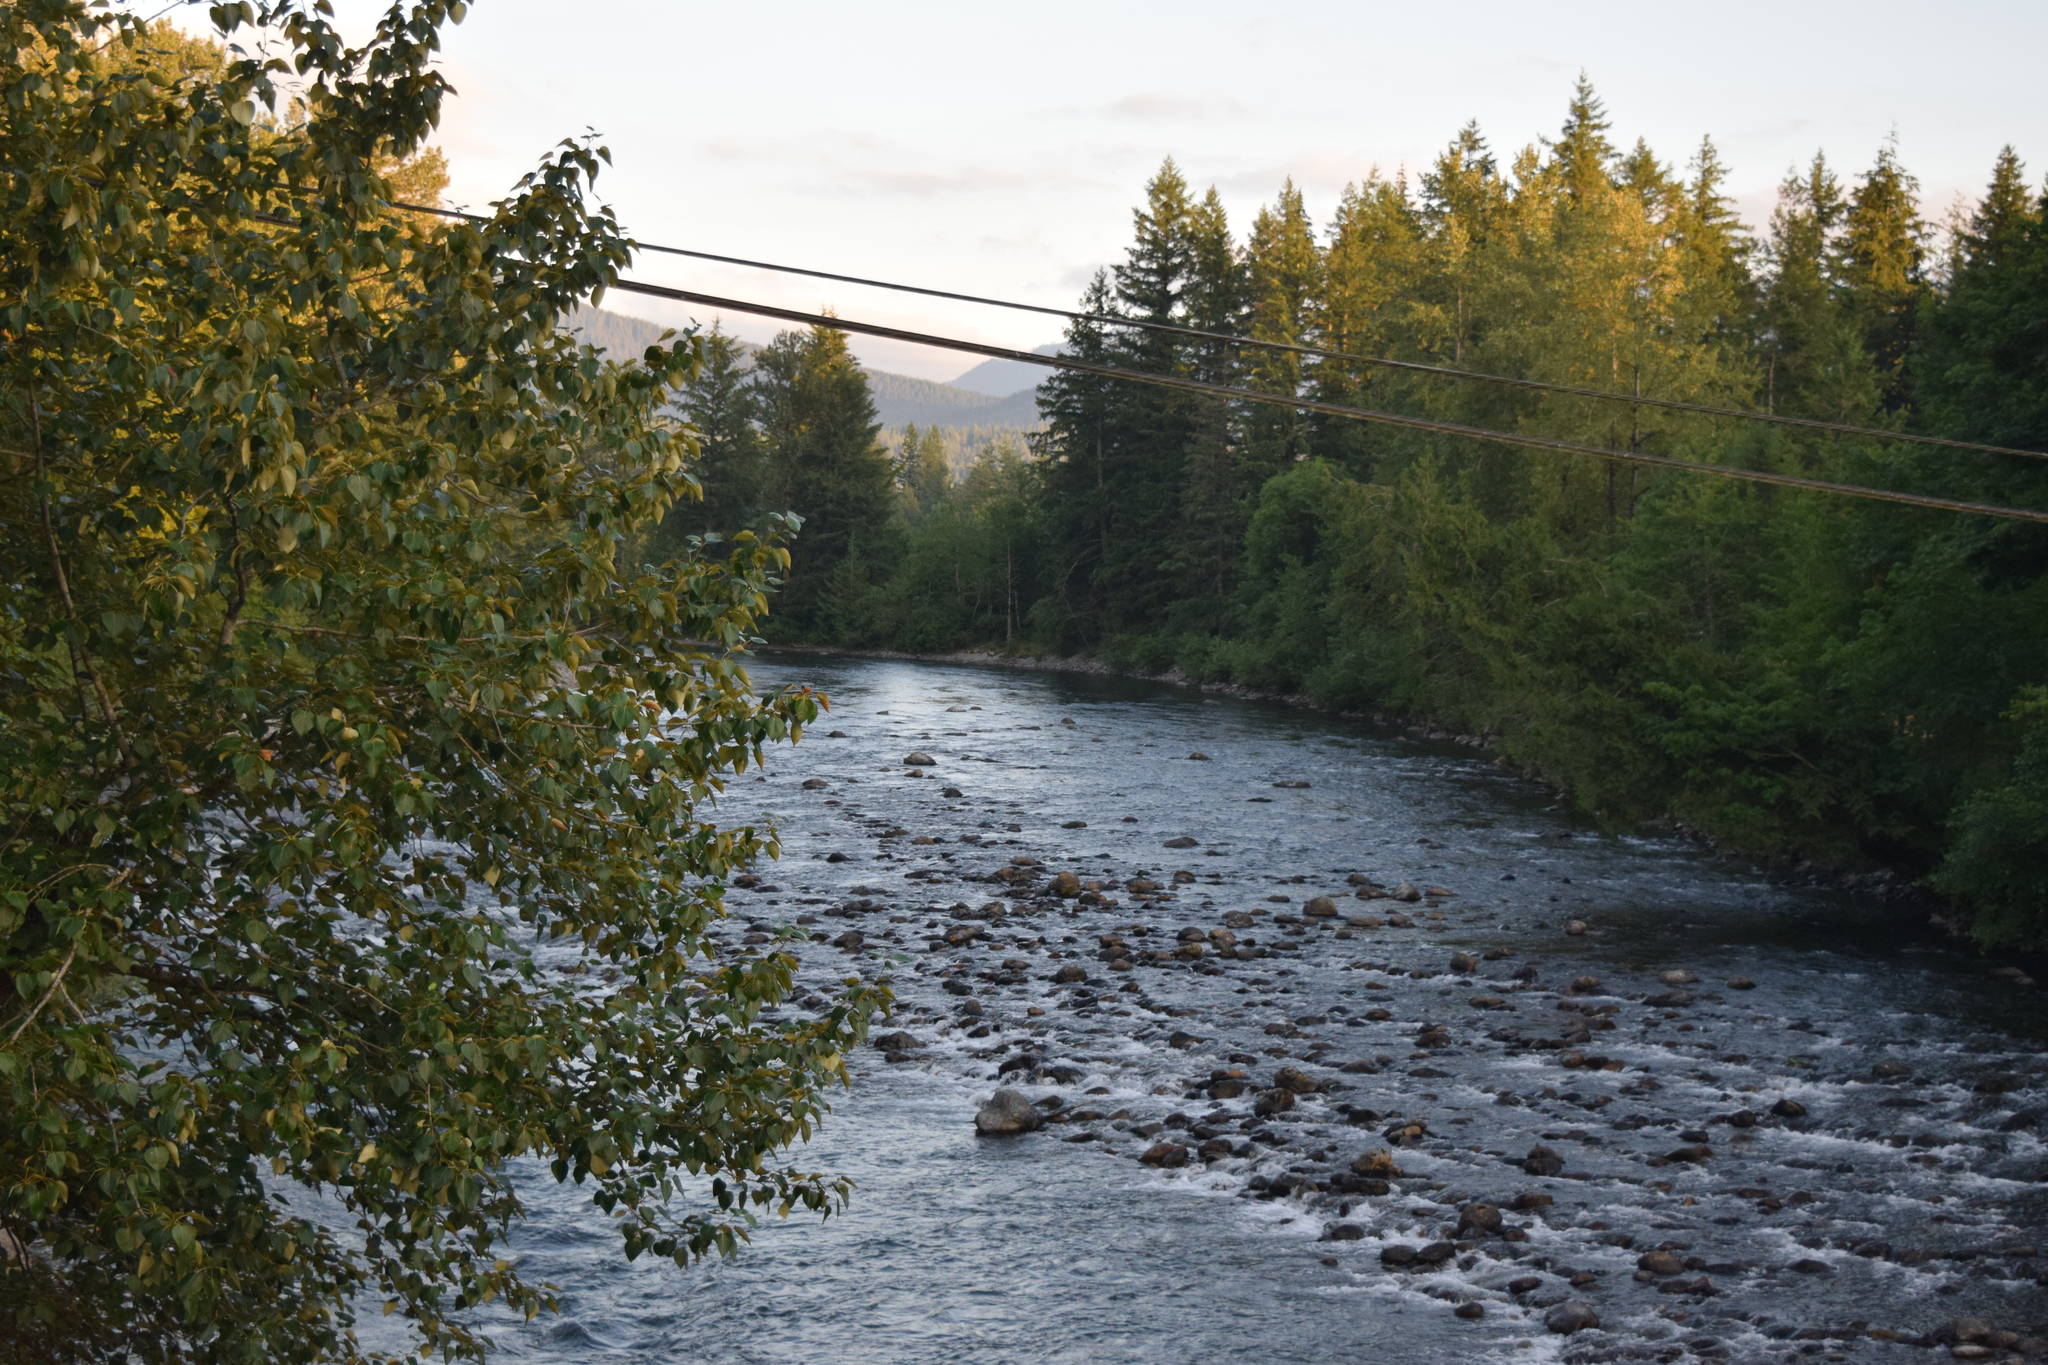 Photo by Conor Wilson/Valley Record
A view of the Snoqualmie River from Mt Si Road bridge in North Bend.